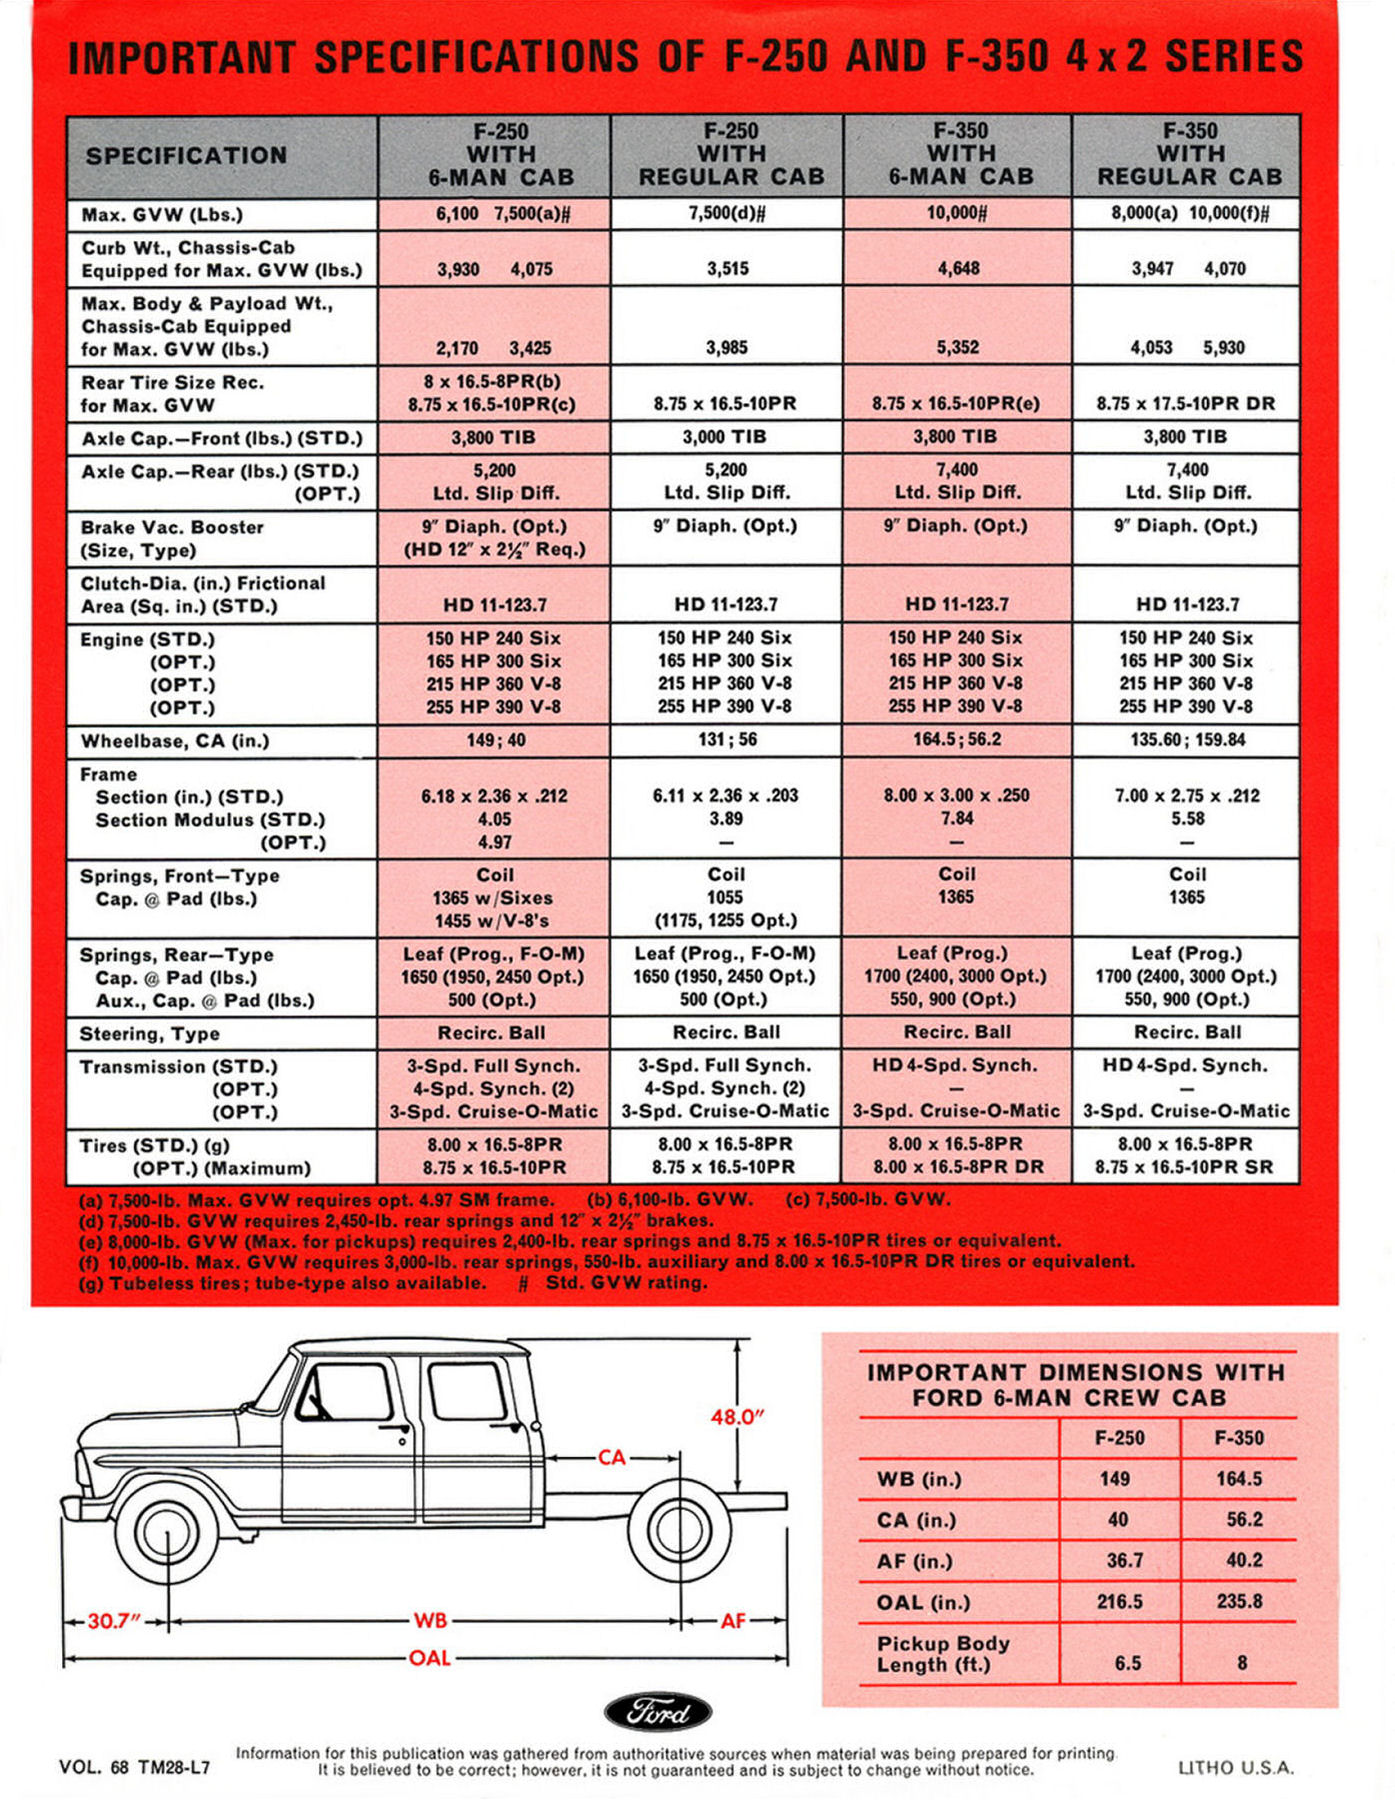 1968 Ford Crew Cab Sales Features-04